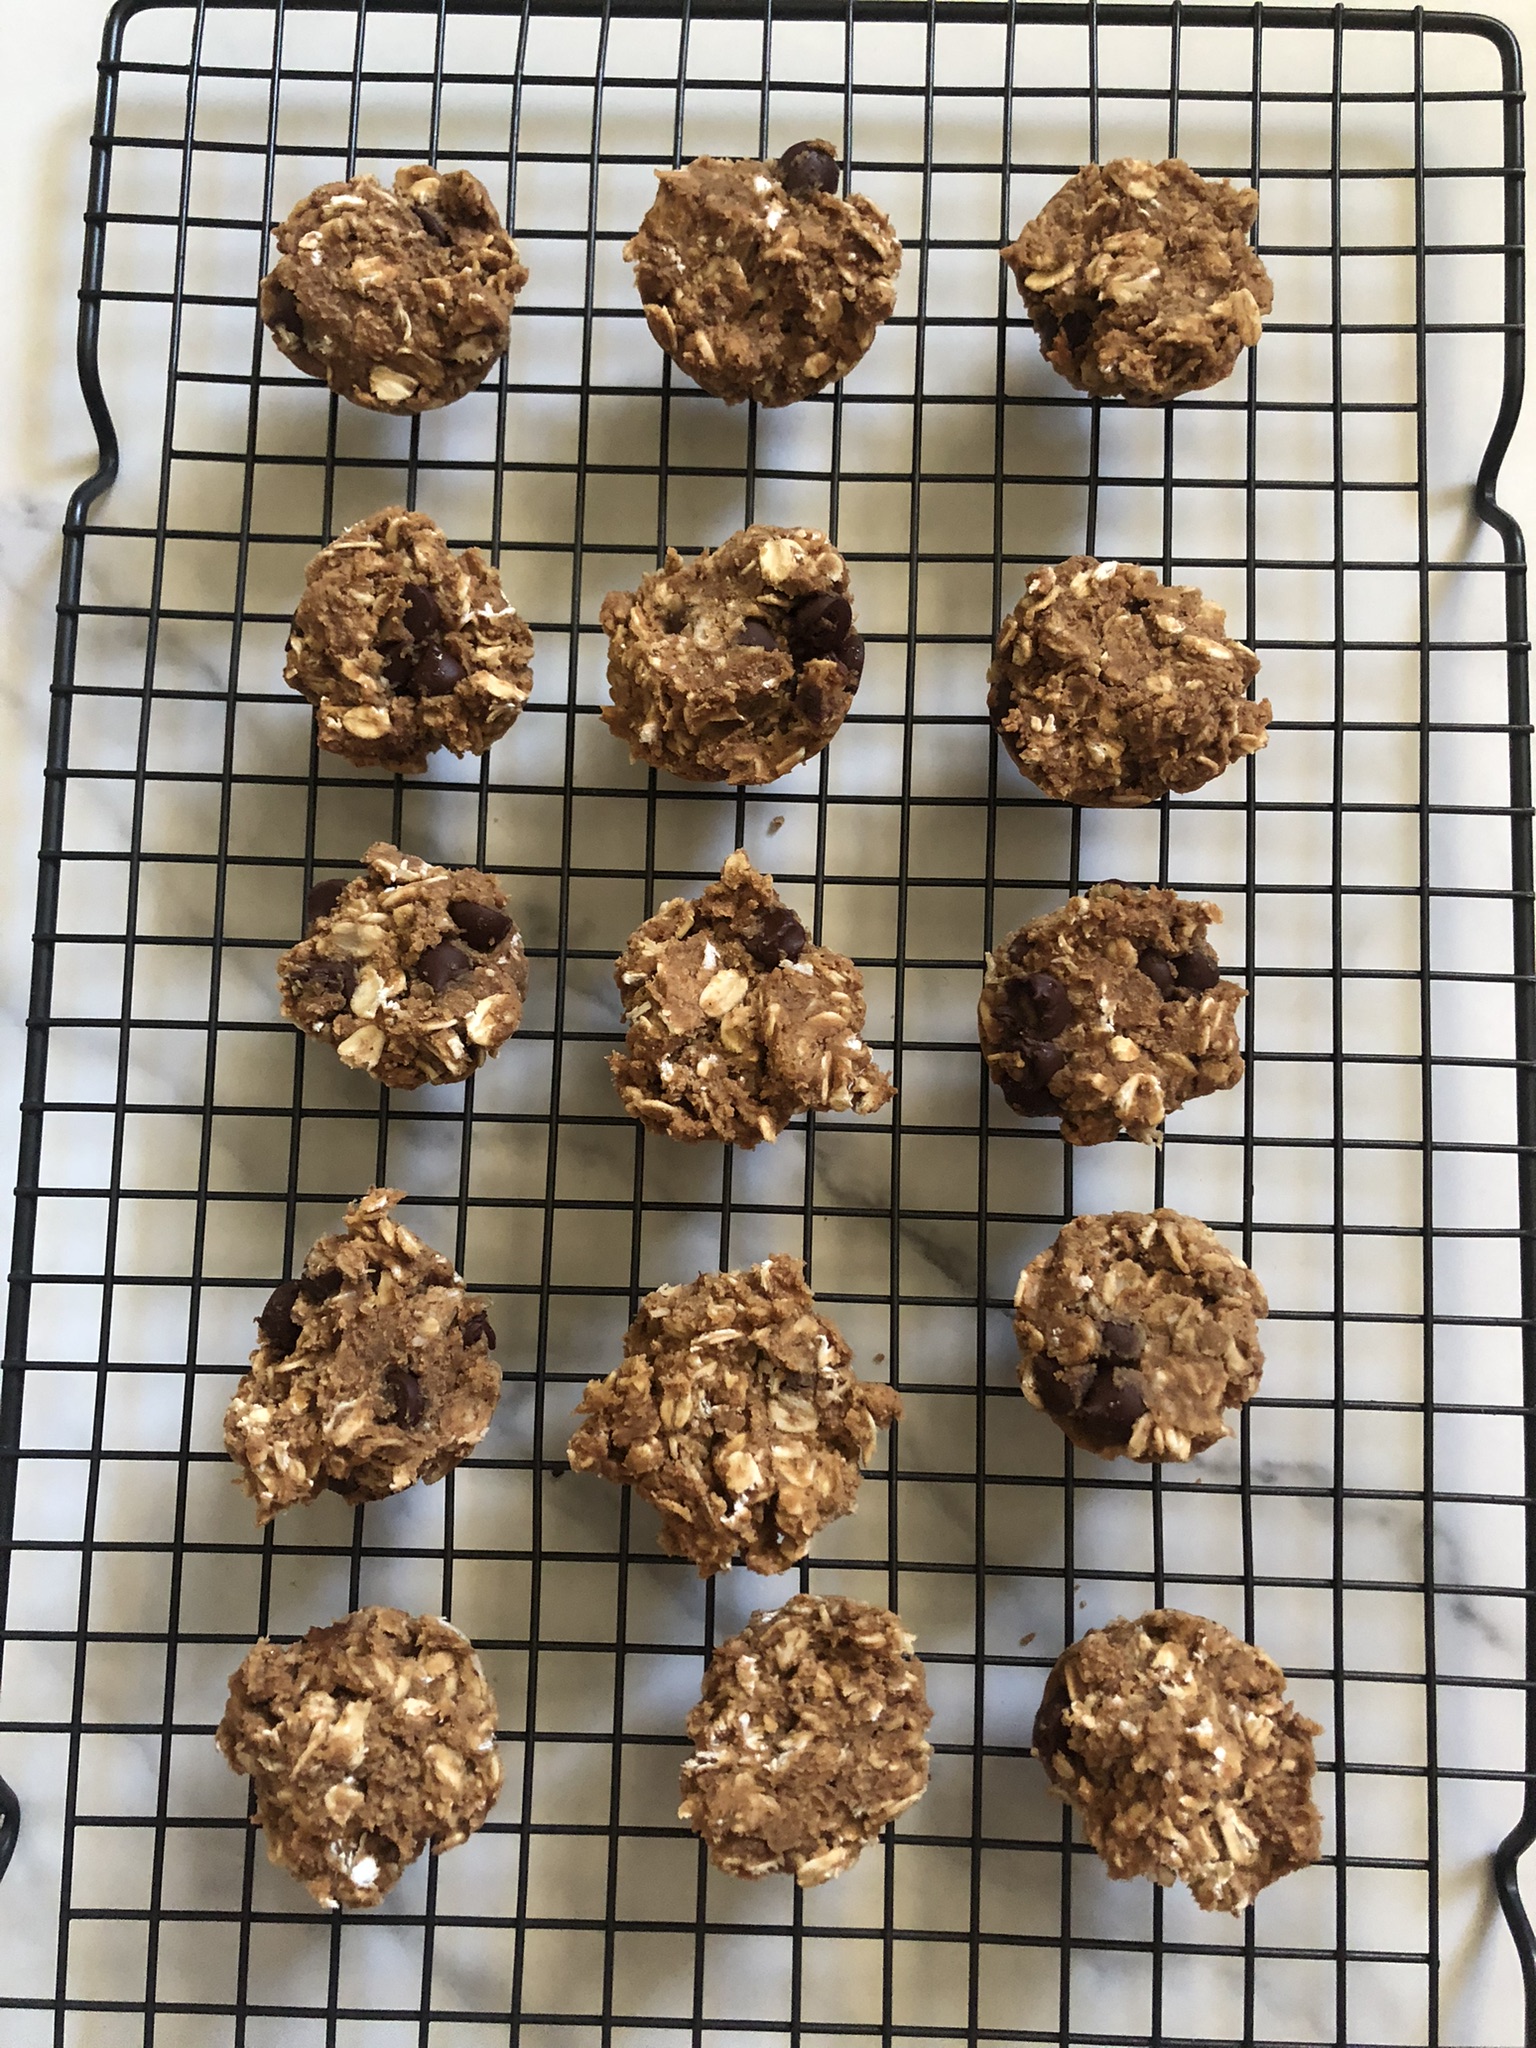 Low-Calorie, High-Protein Peanut Butter Chocolate Chip Oat Cups